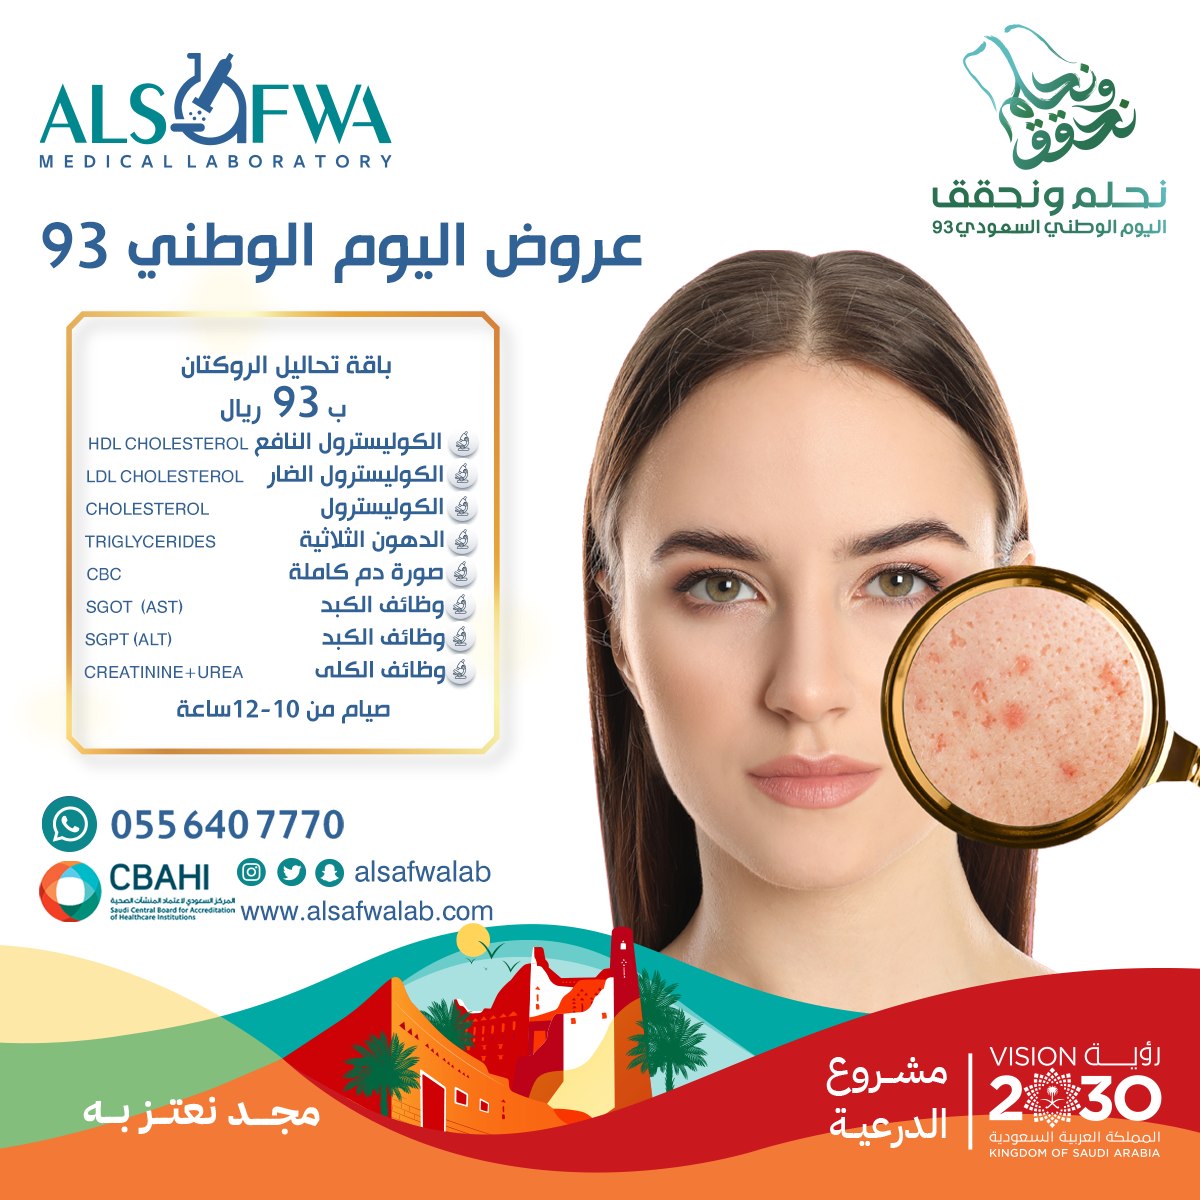 Al-Safwa Laboratories discounts for the National Day 1445